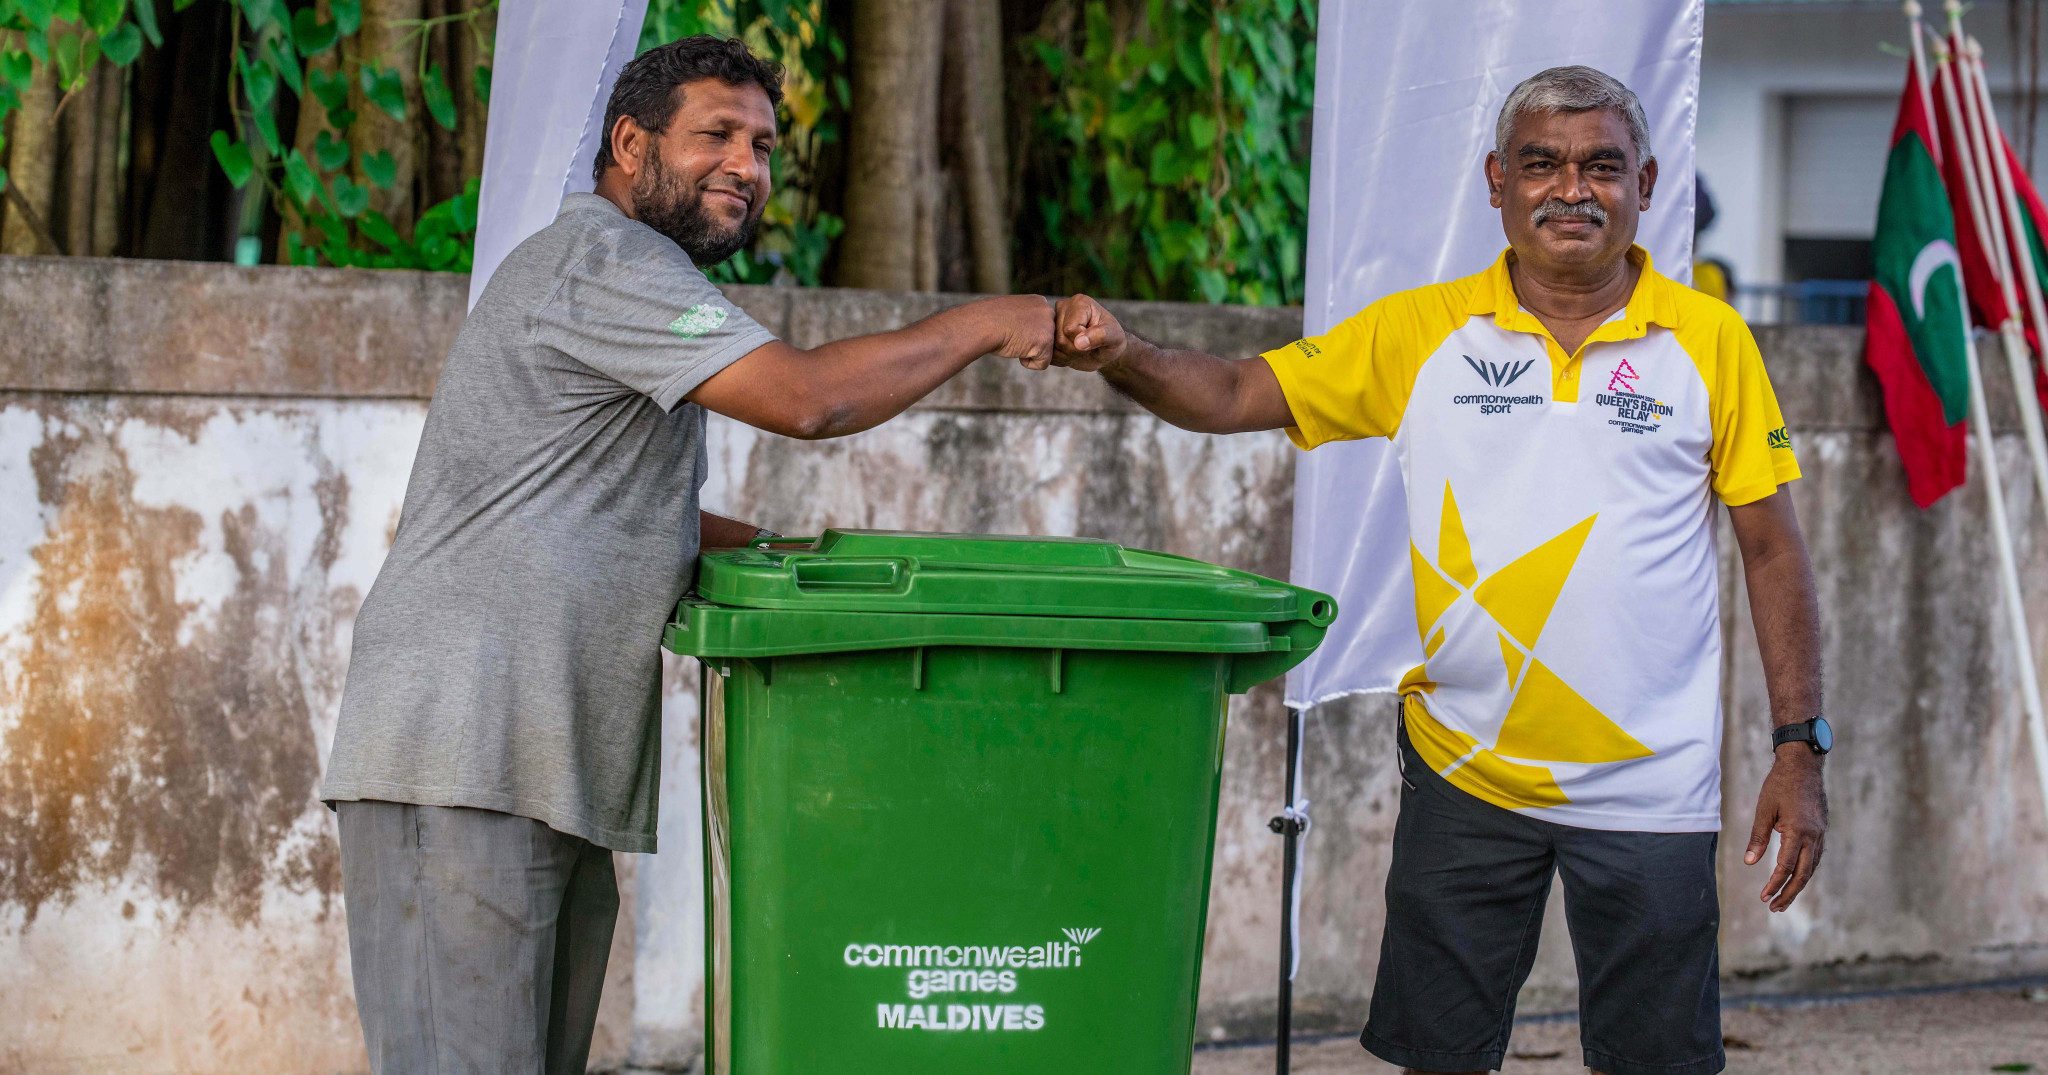 Environmental focus as Queen's Baton Relay visits Maldives and encounters Commonwealth Games medallists Pakistan